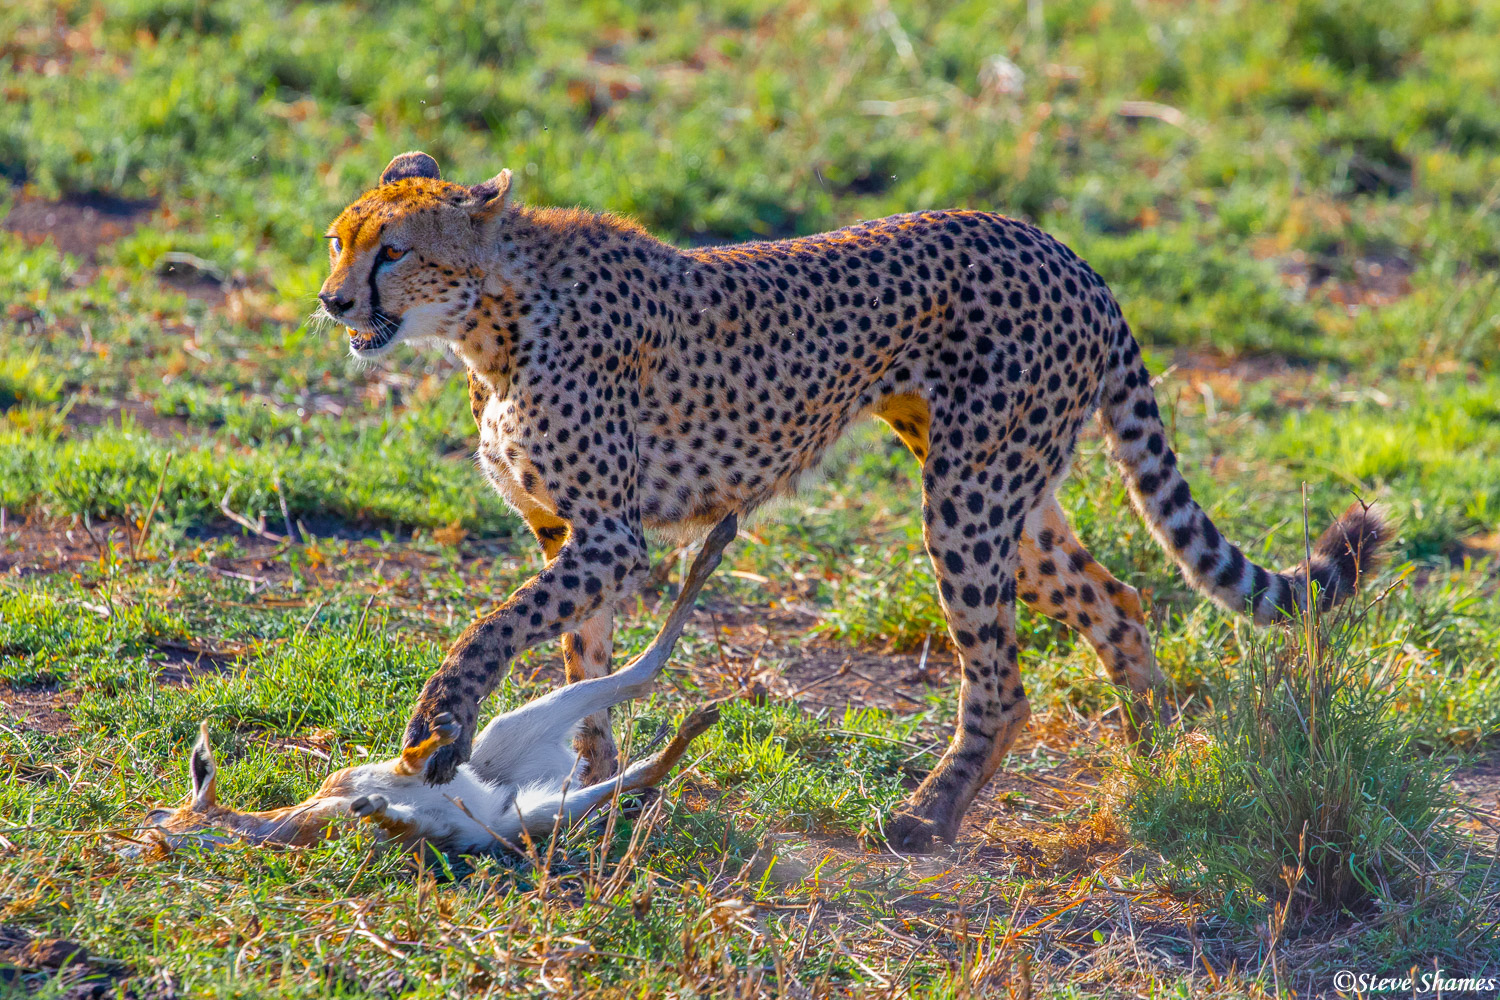 The mother brings back the gazelle, shaken up but very alive, and presents it to her cub.